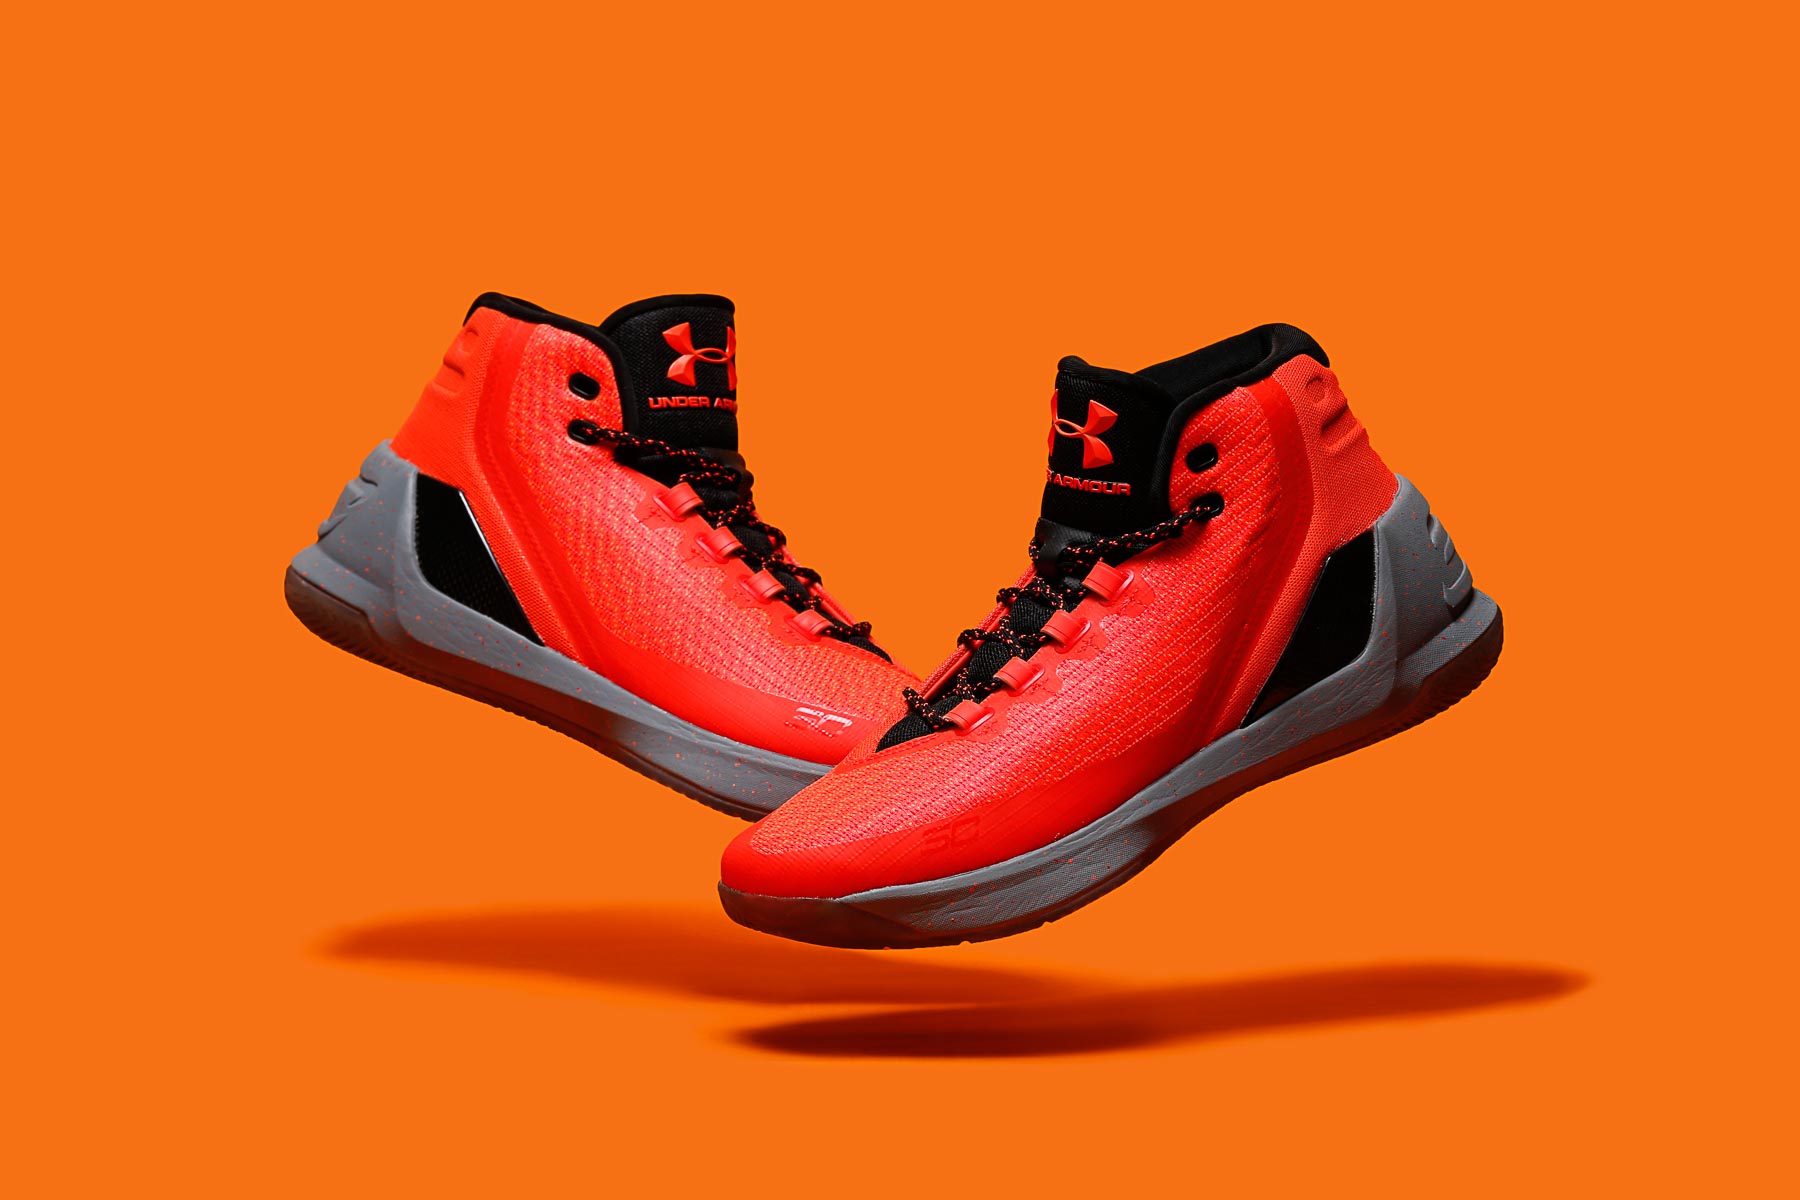 curry 3 red